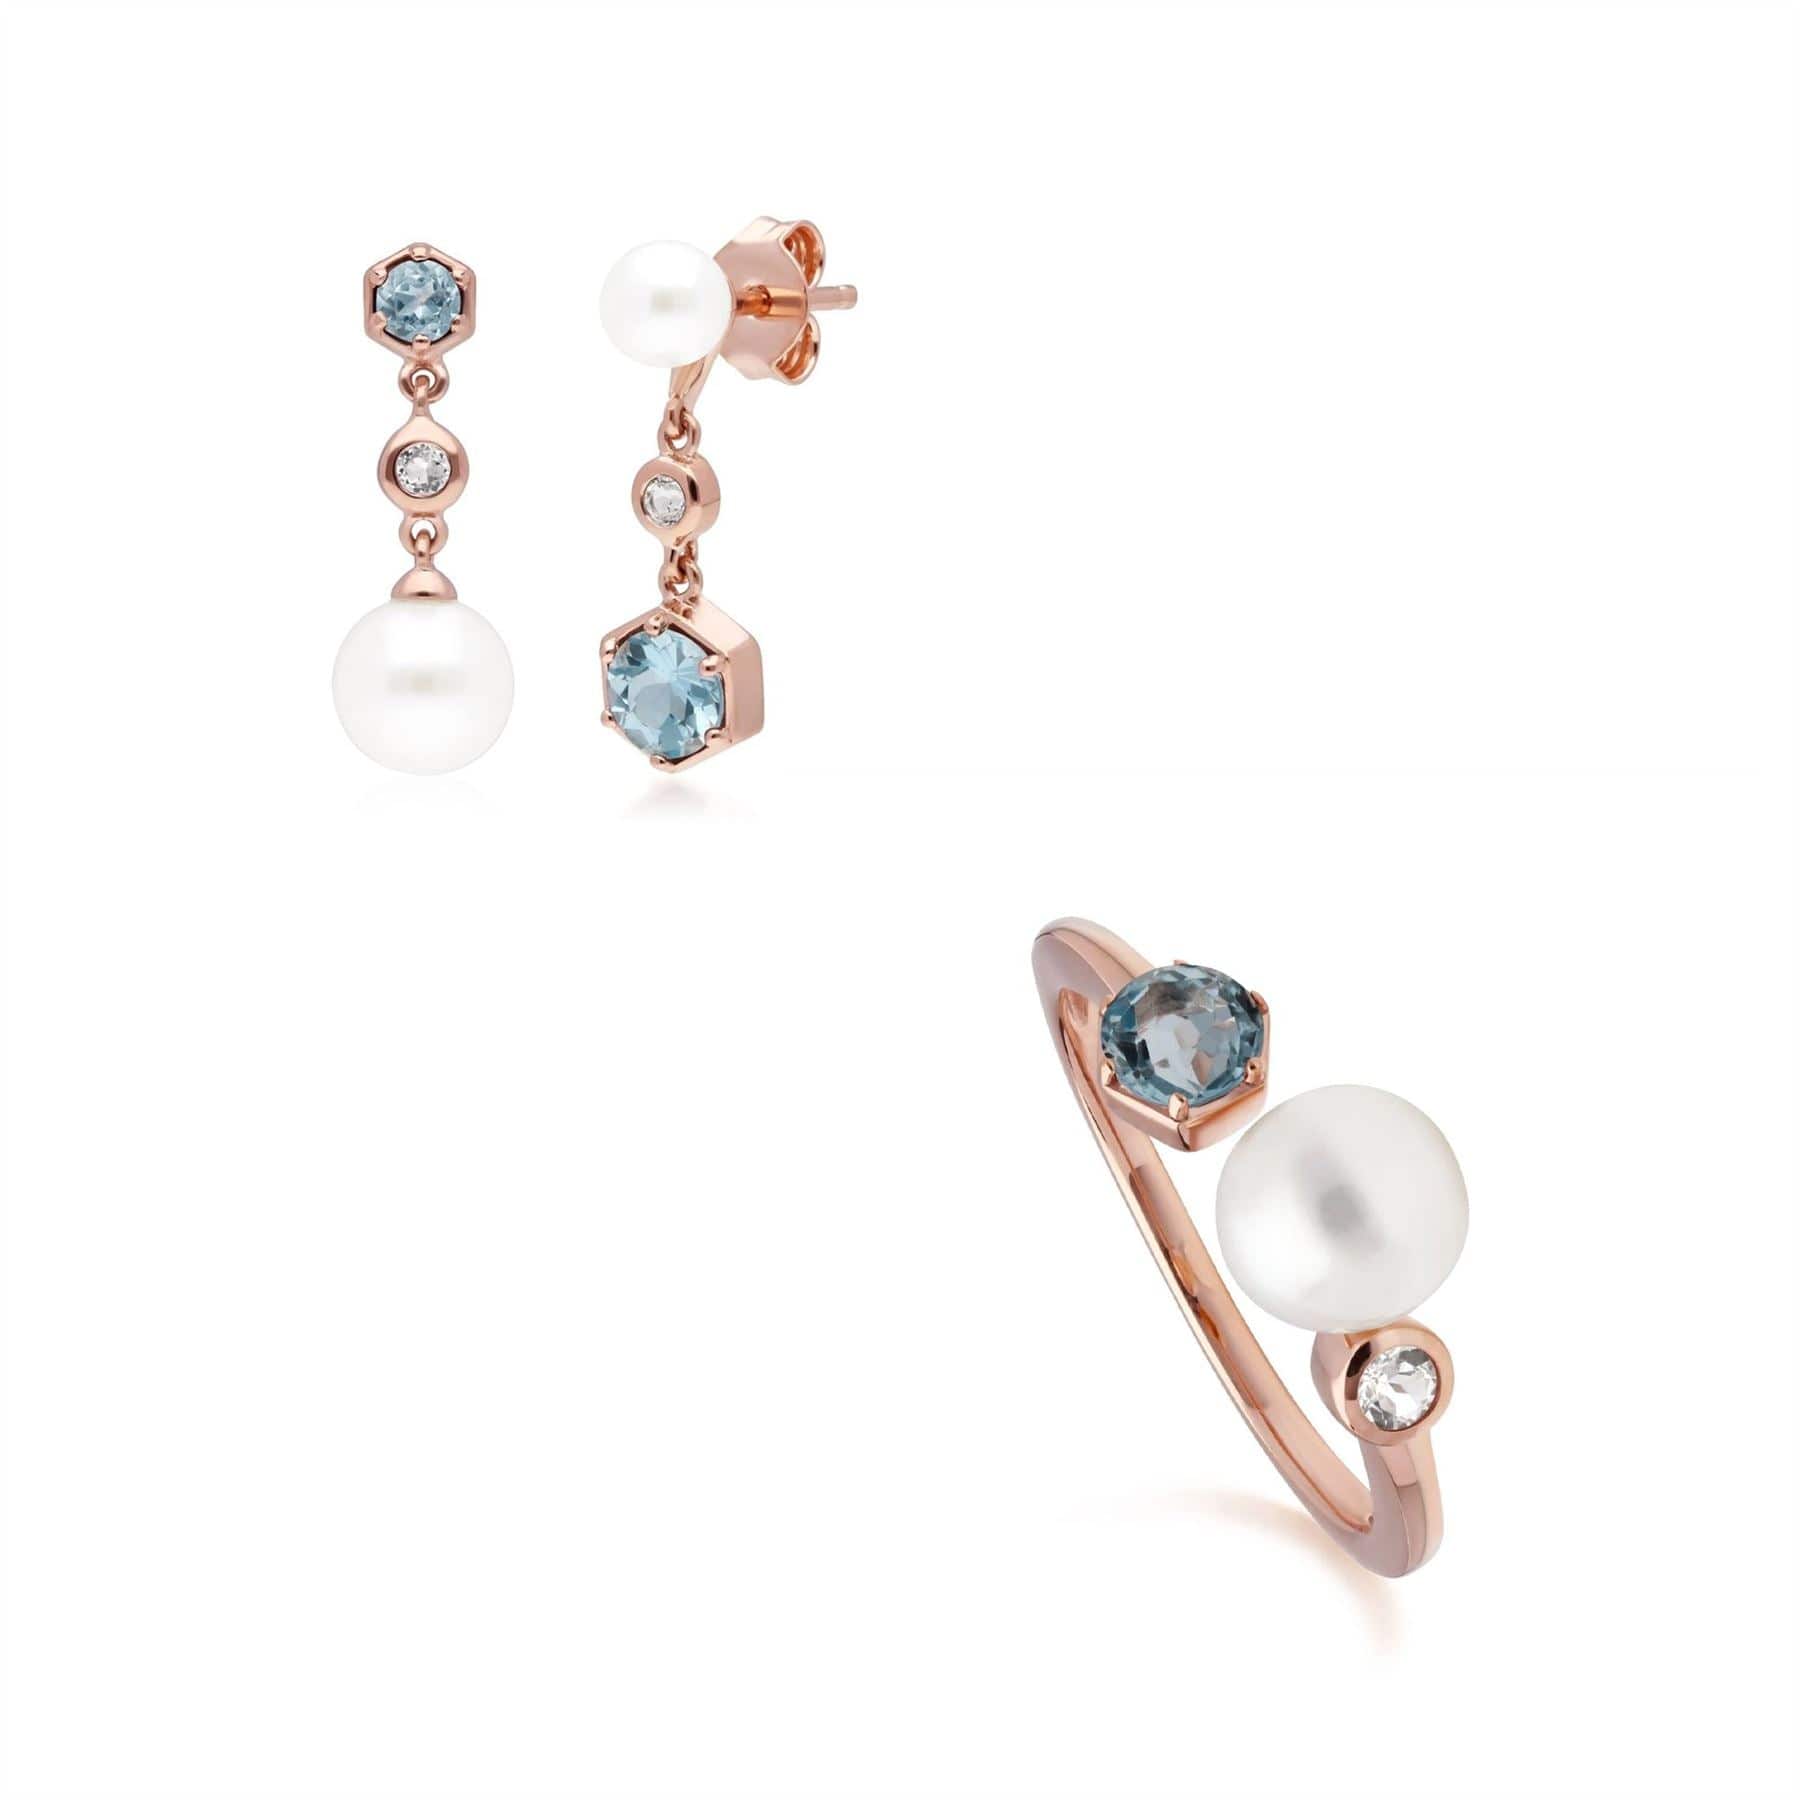 Modern Pearl & Topaz Earring & Ring Set in Rose Gold Plated Silver - Gemondo